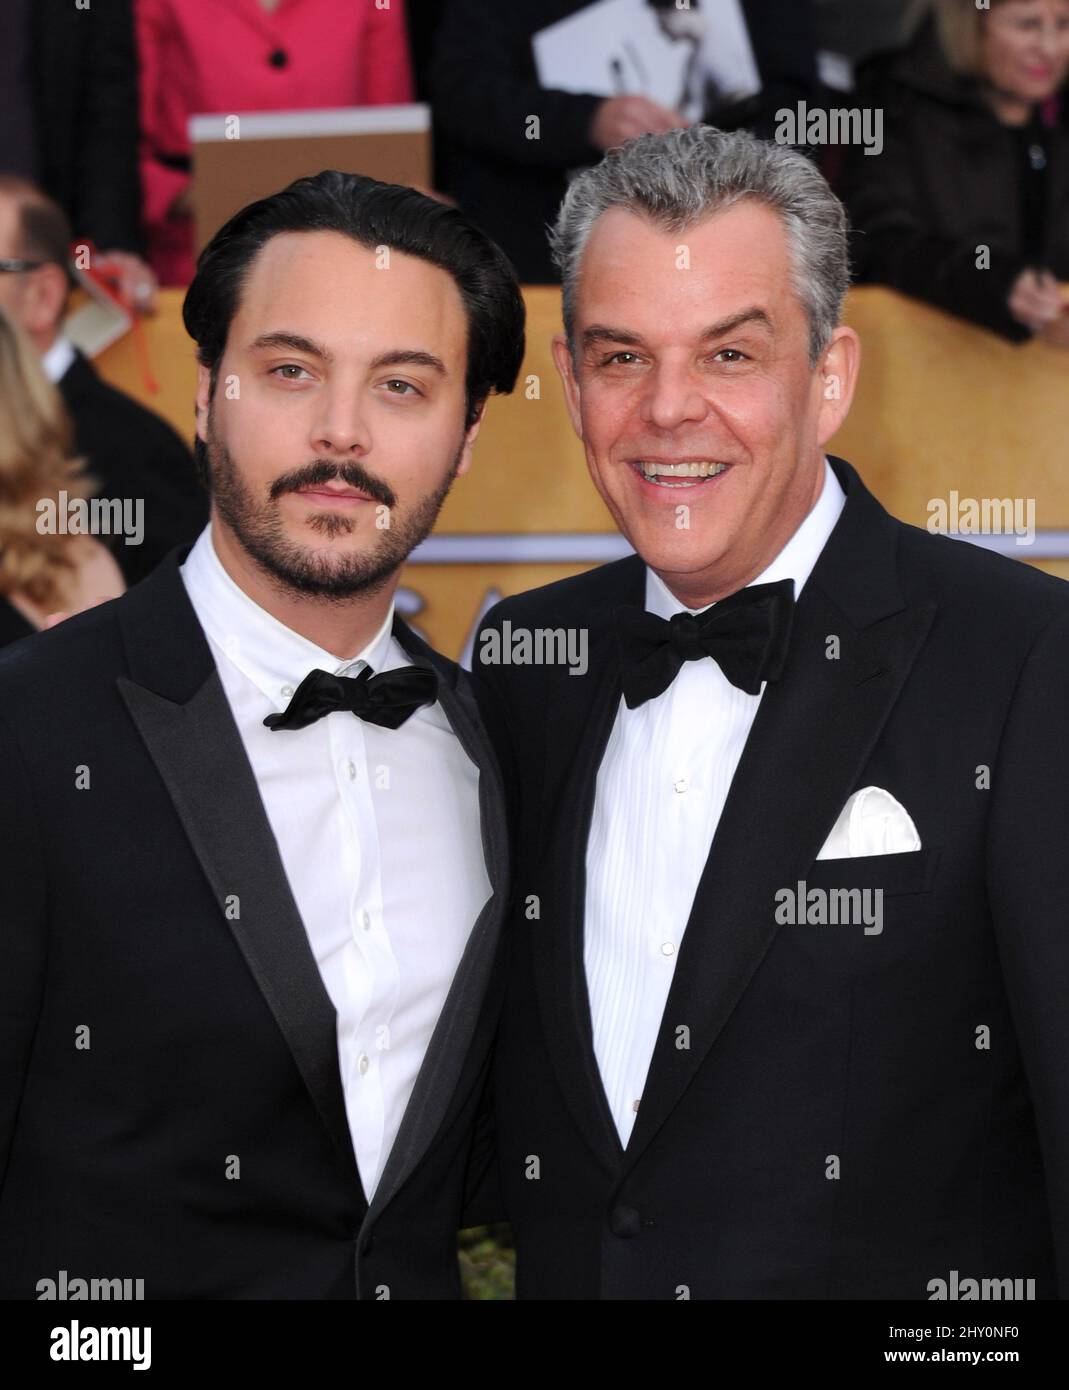 Jack Huston and Danny Huston arriving at the 19th Annual Screen Actor's Guild Awards held at the Shrine Auditorium, Los Angeles. Stock Photo